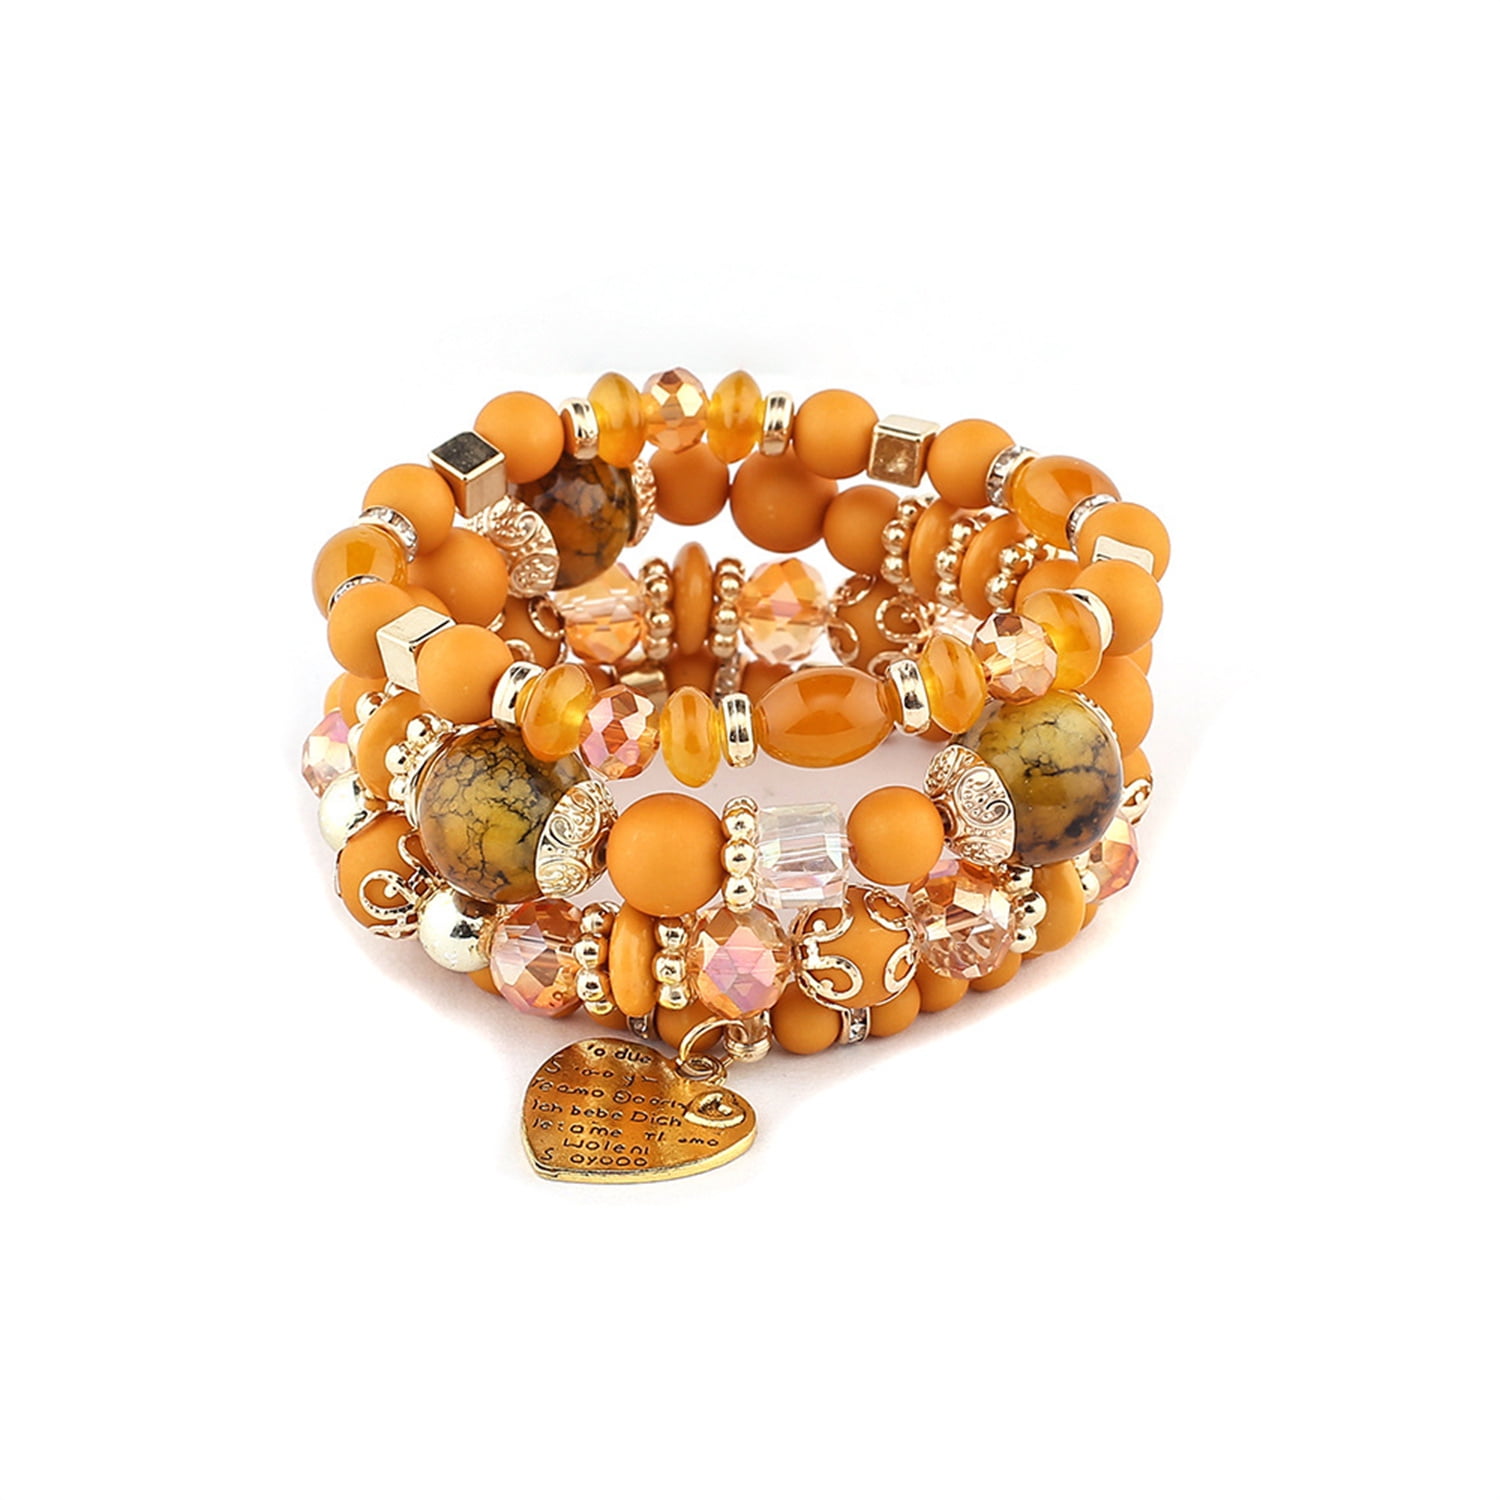 Twinfree Bohemian Stretch Bracelets for Women Multilayer Colorful Beads Bracelet with Charm Jewelry 